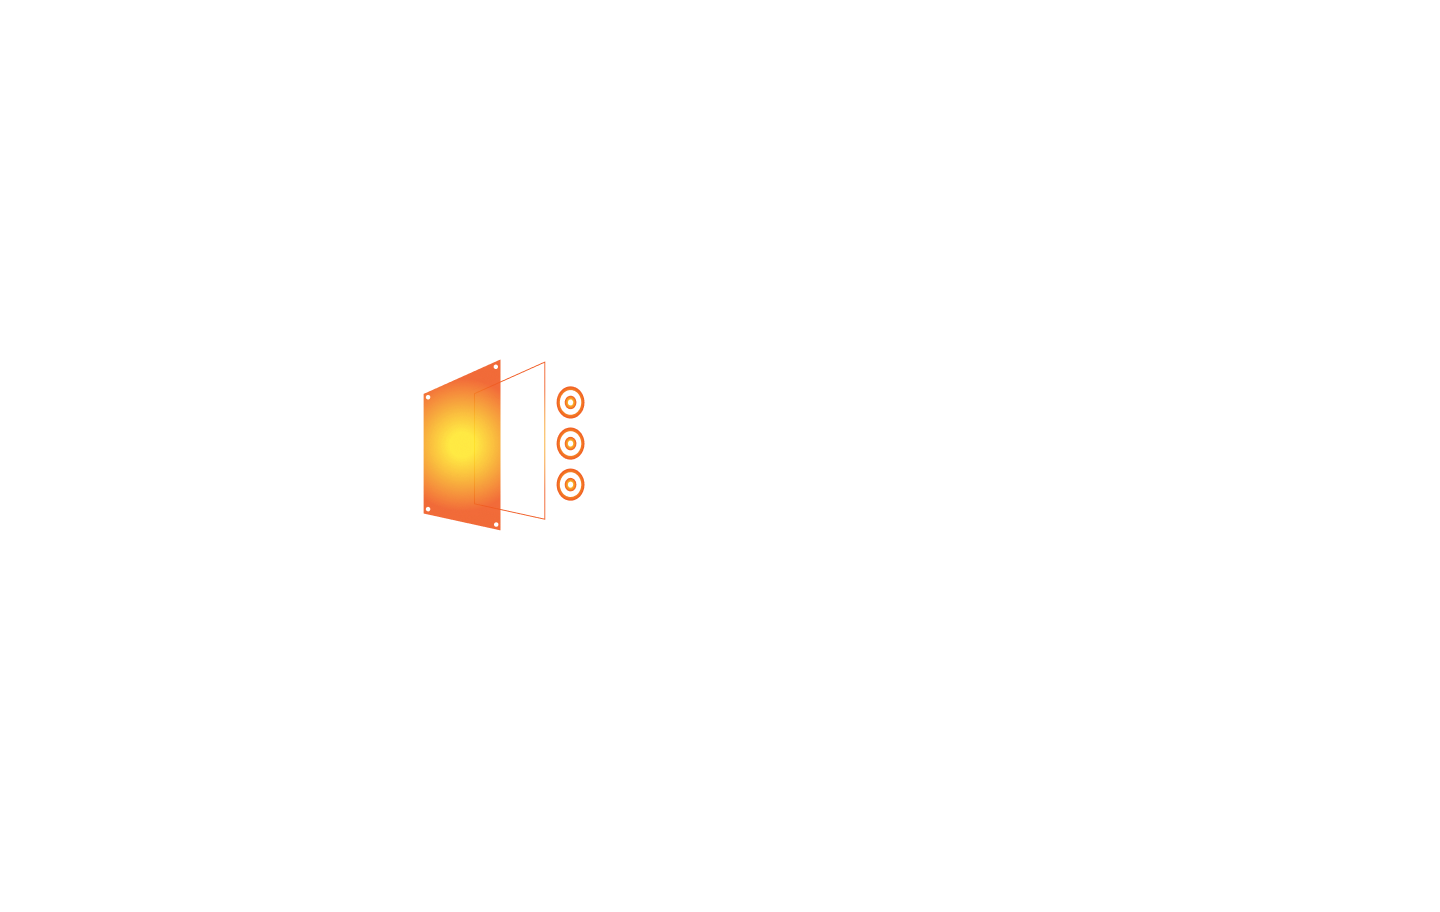 Online Computer Store - Best Prices, PC Parts, Gaming PC, PC Builder